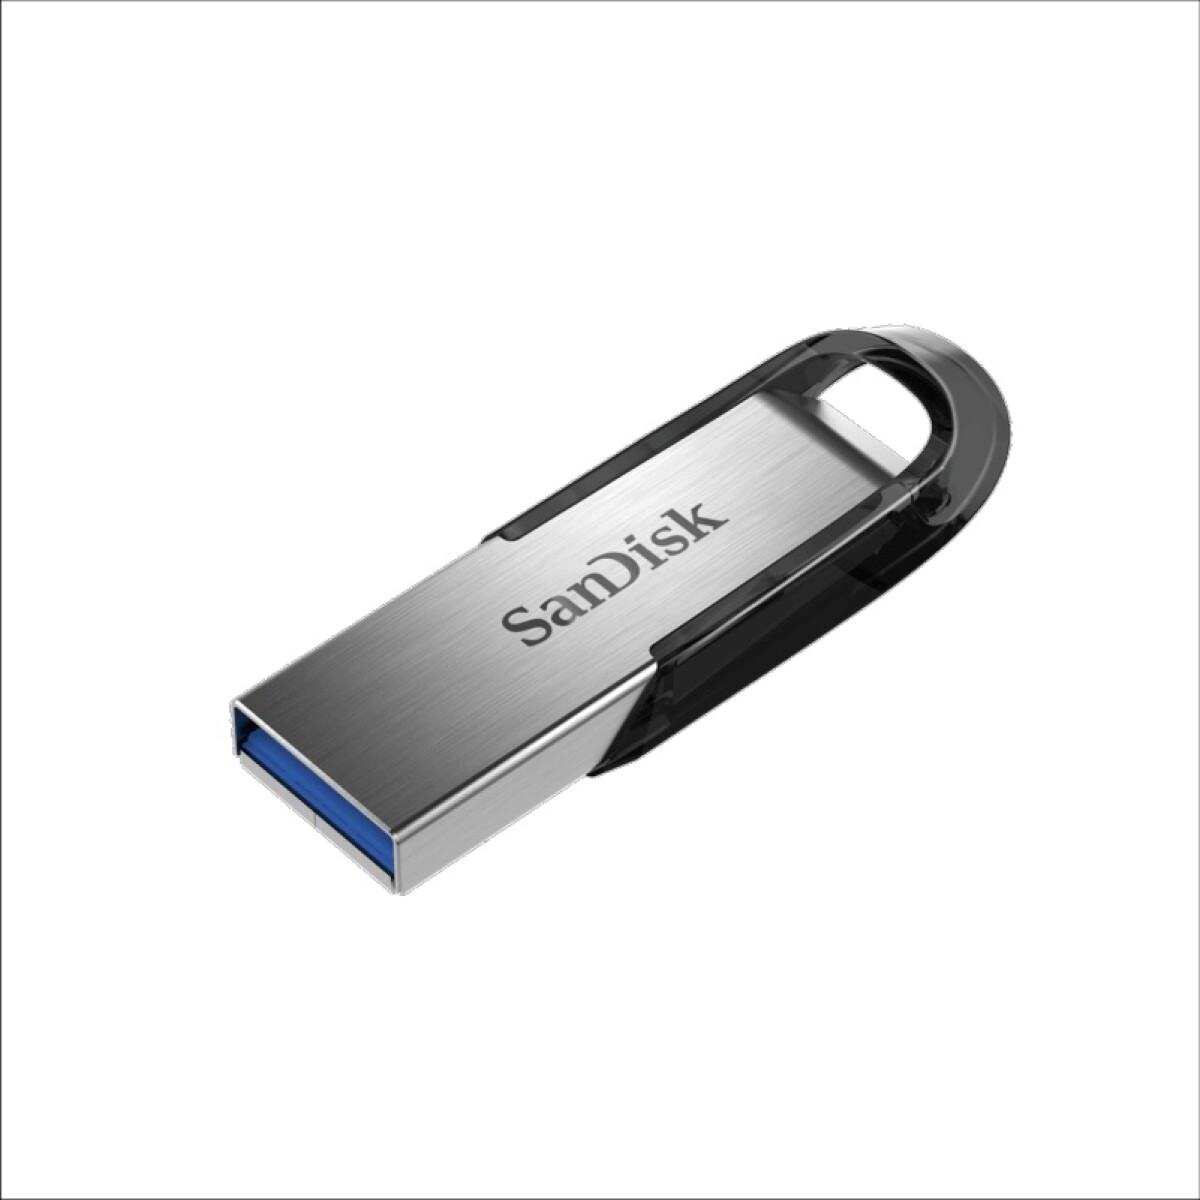 Pendrive SanDisk 32GB Ultra Flair SDCZ73 USB 3.0 